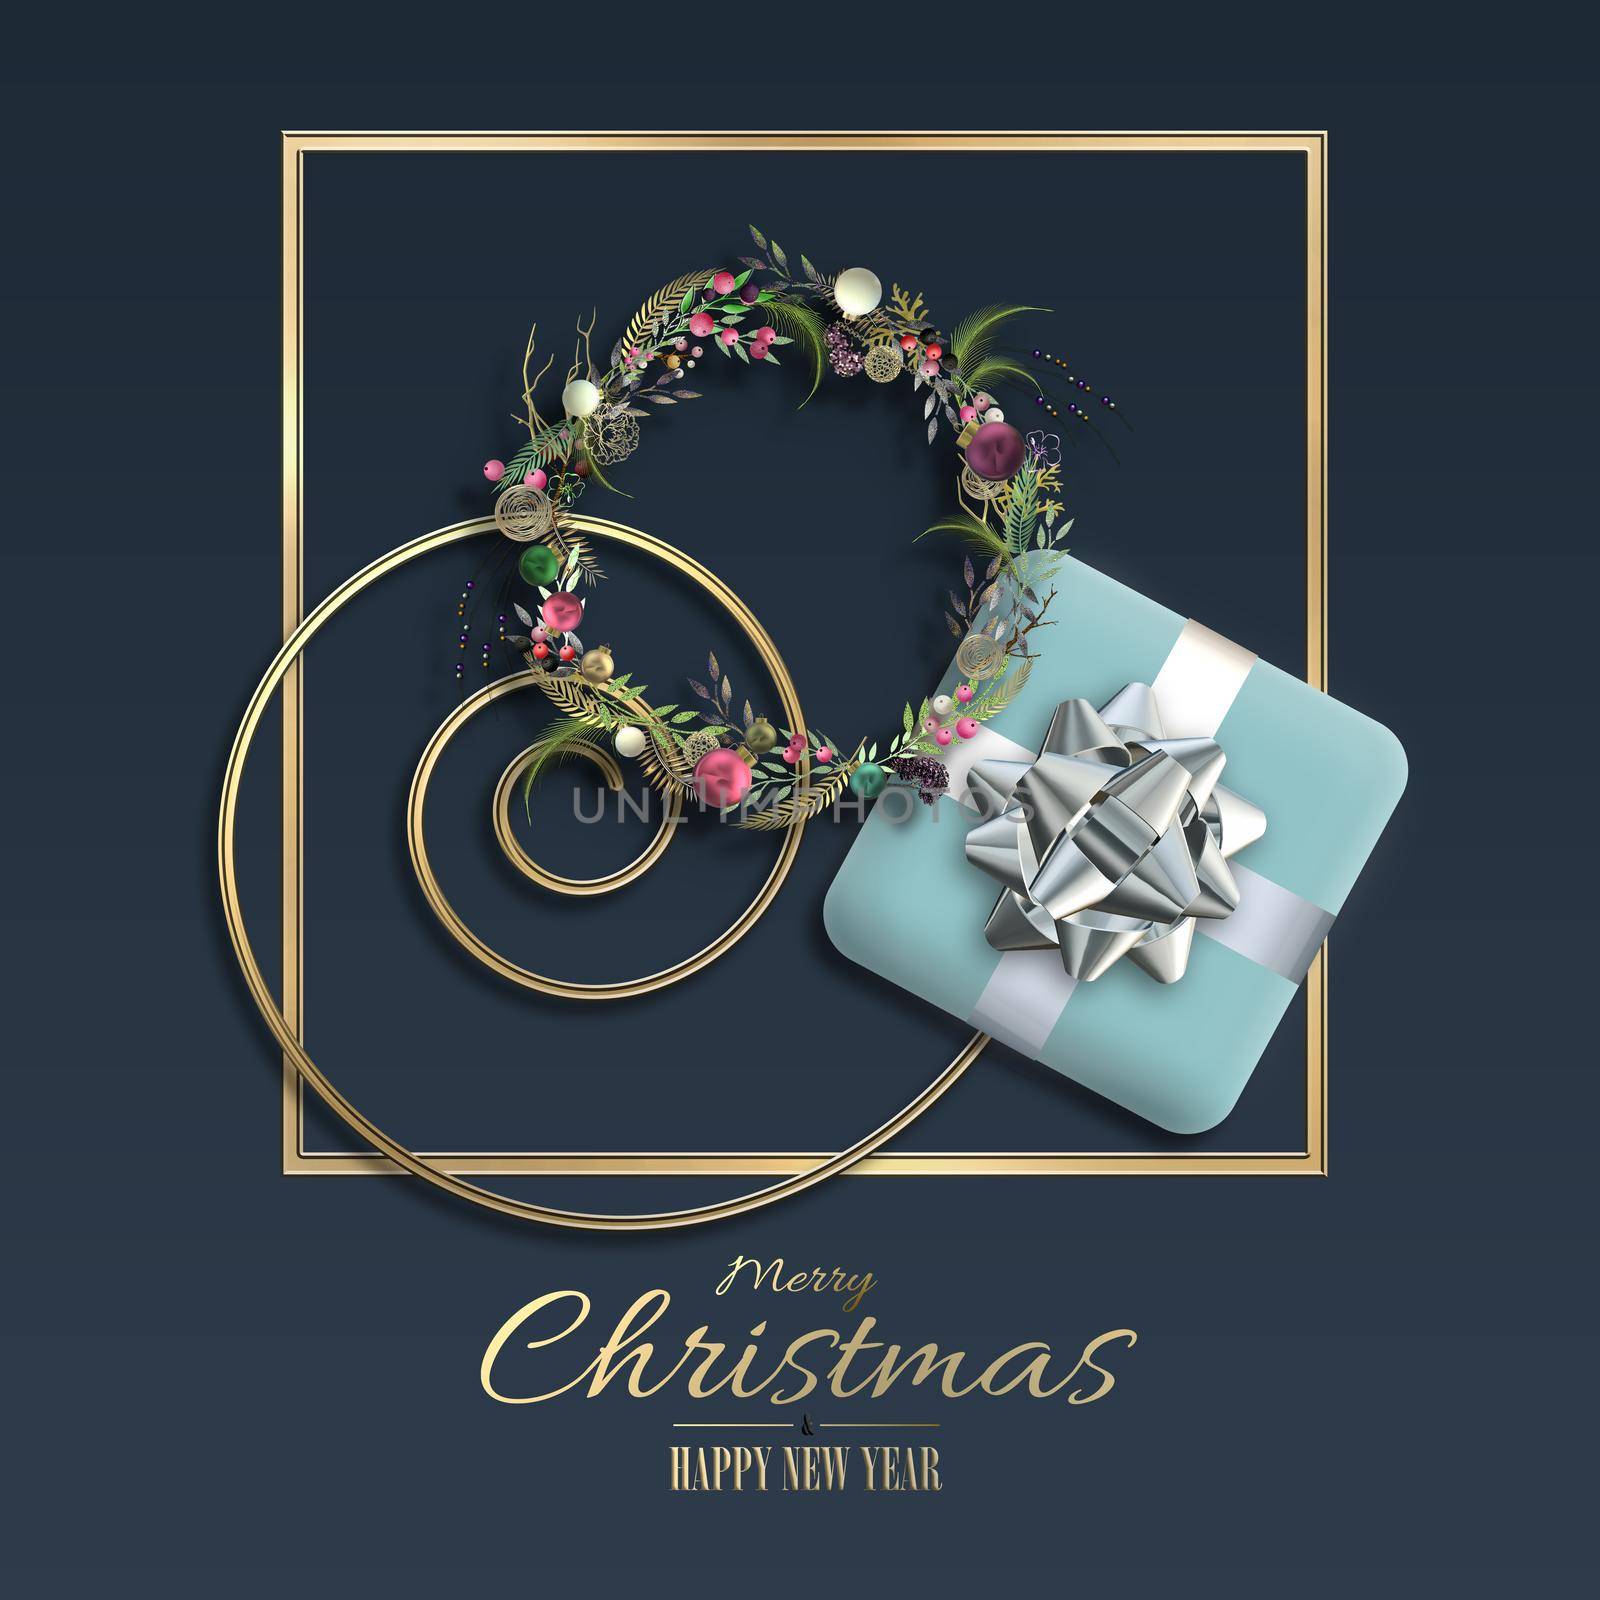 Modern unusual minimalist Christmas ornament in blue gold colours. Xmas realistic wreath, Xmas gift box with silver bow over dramatic blue. Gold text with Christmas wishes. 3D illustration